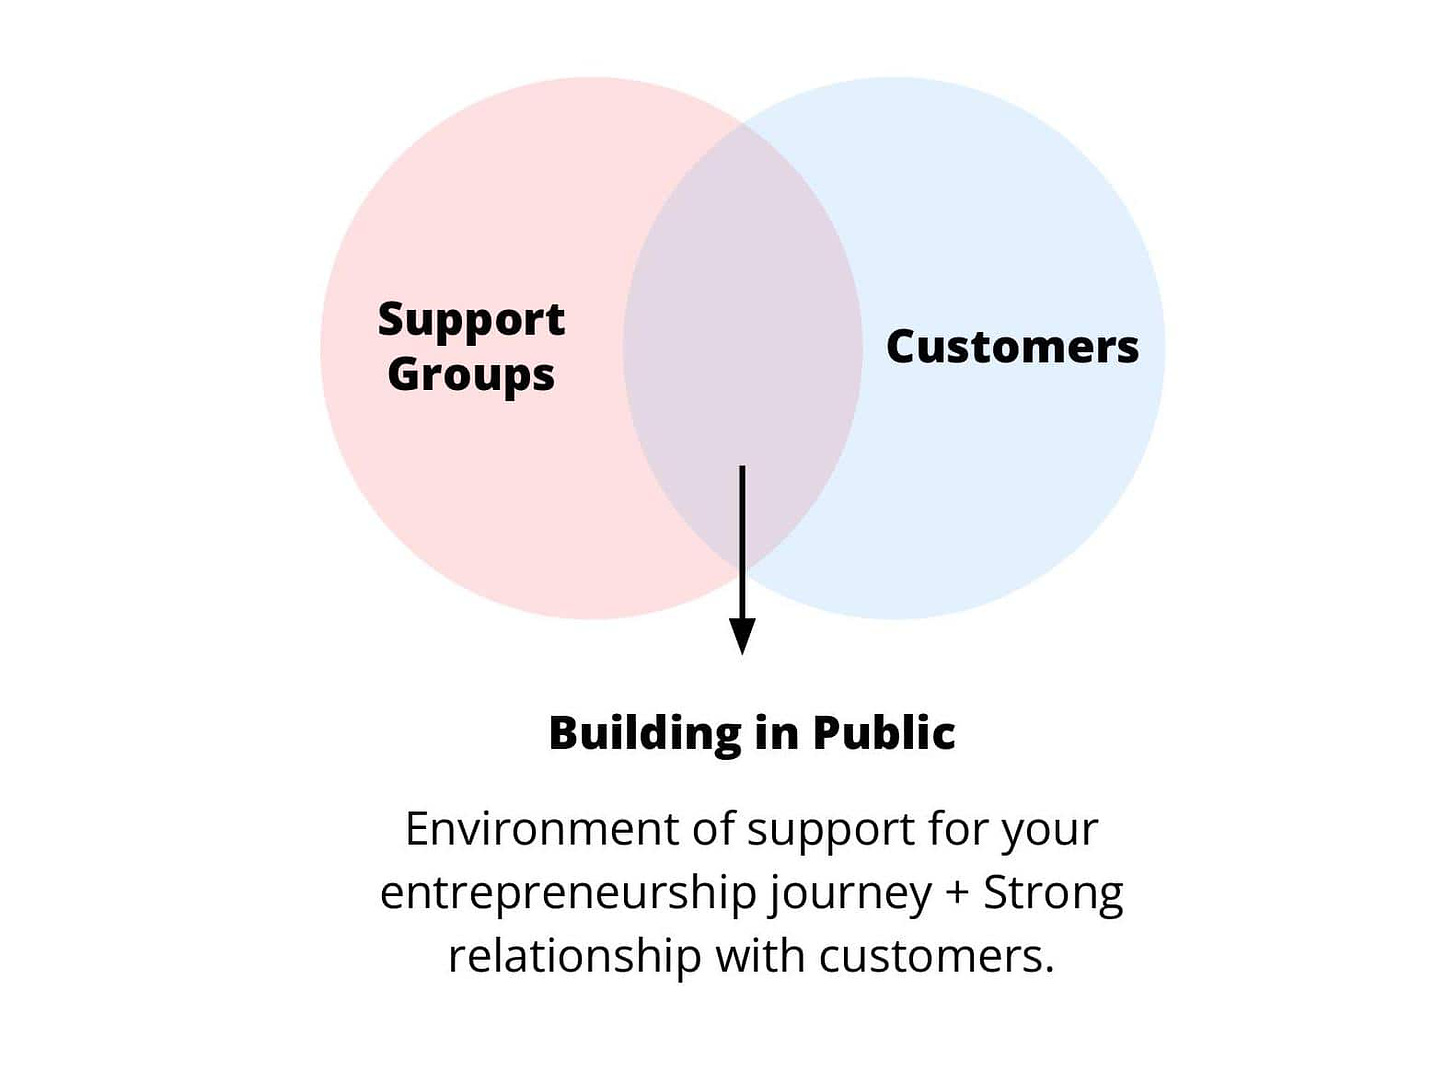 How to Build in Public as a Founder (+20 Examples)